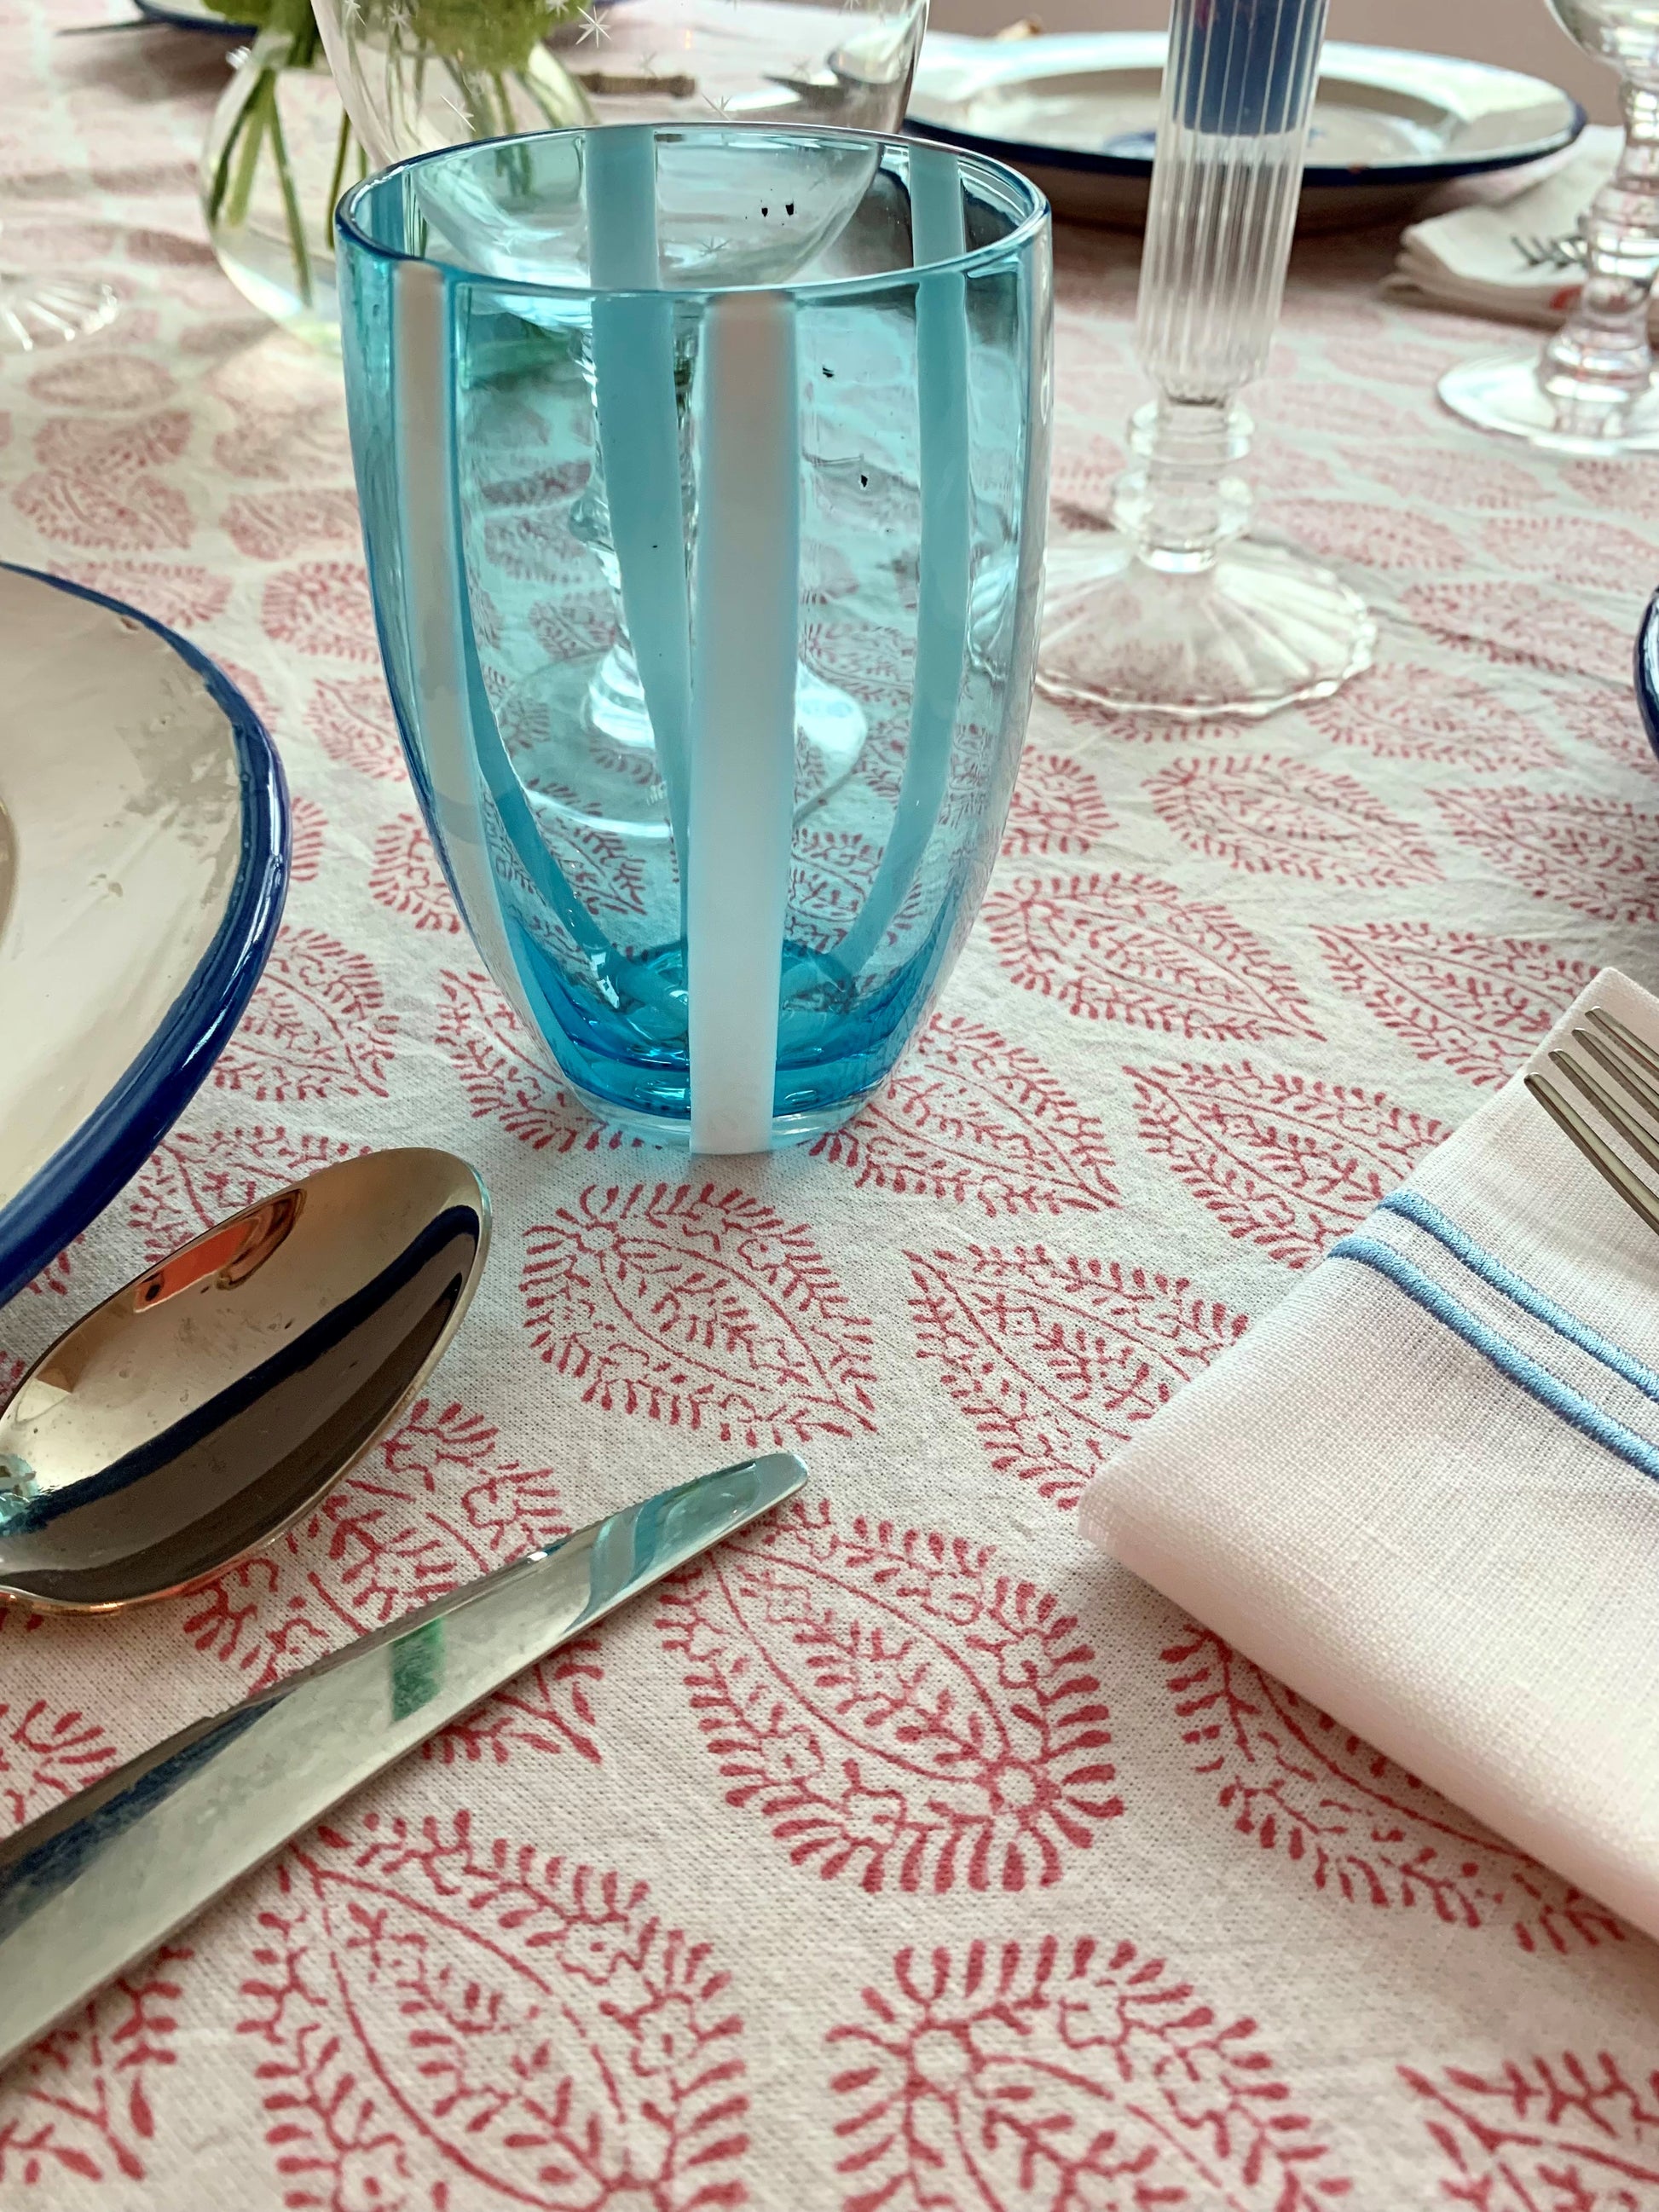 A close up of a blue tumbler on a block printed tablecloth.